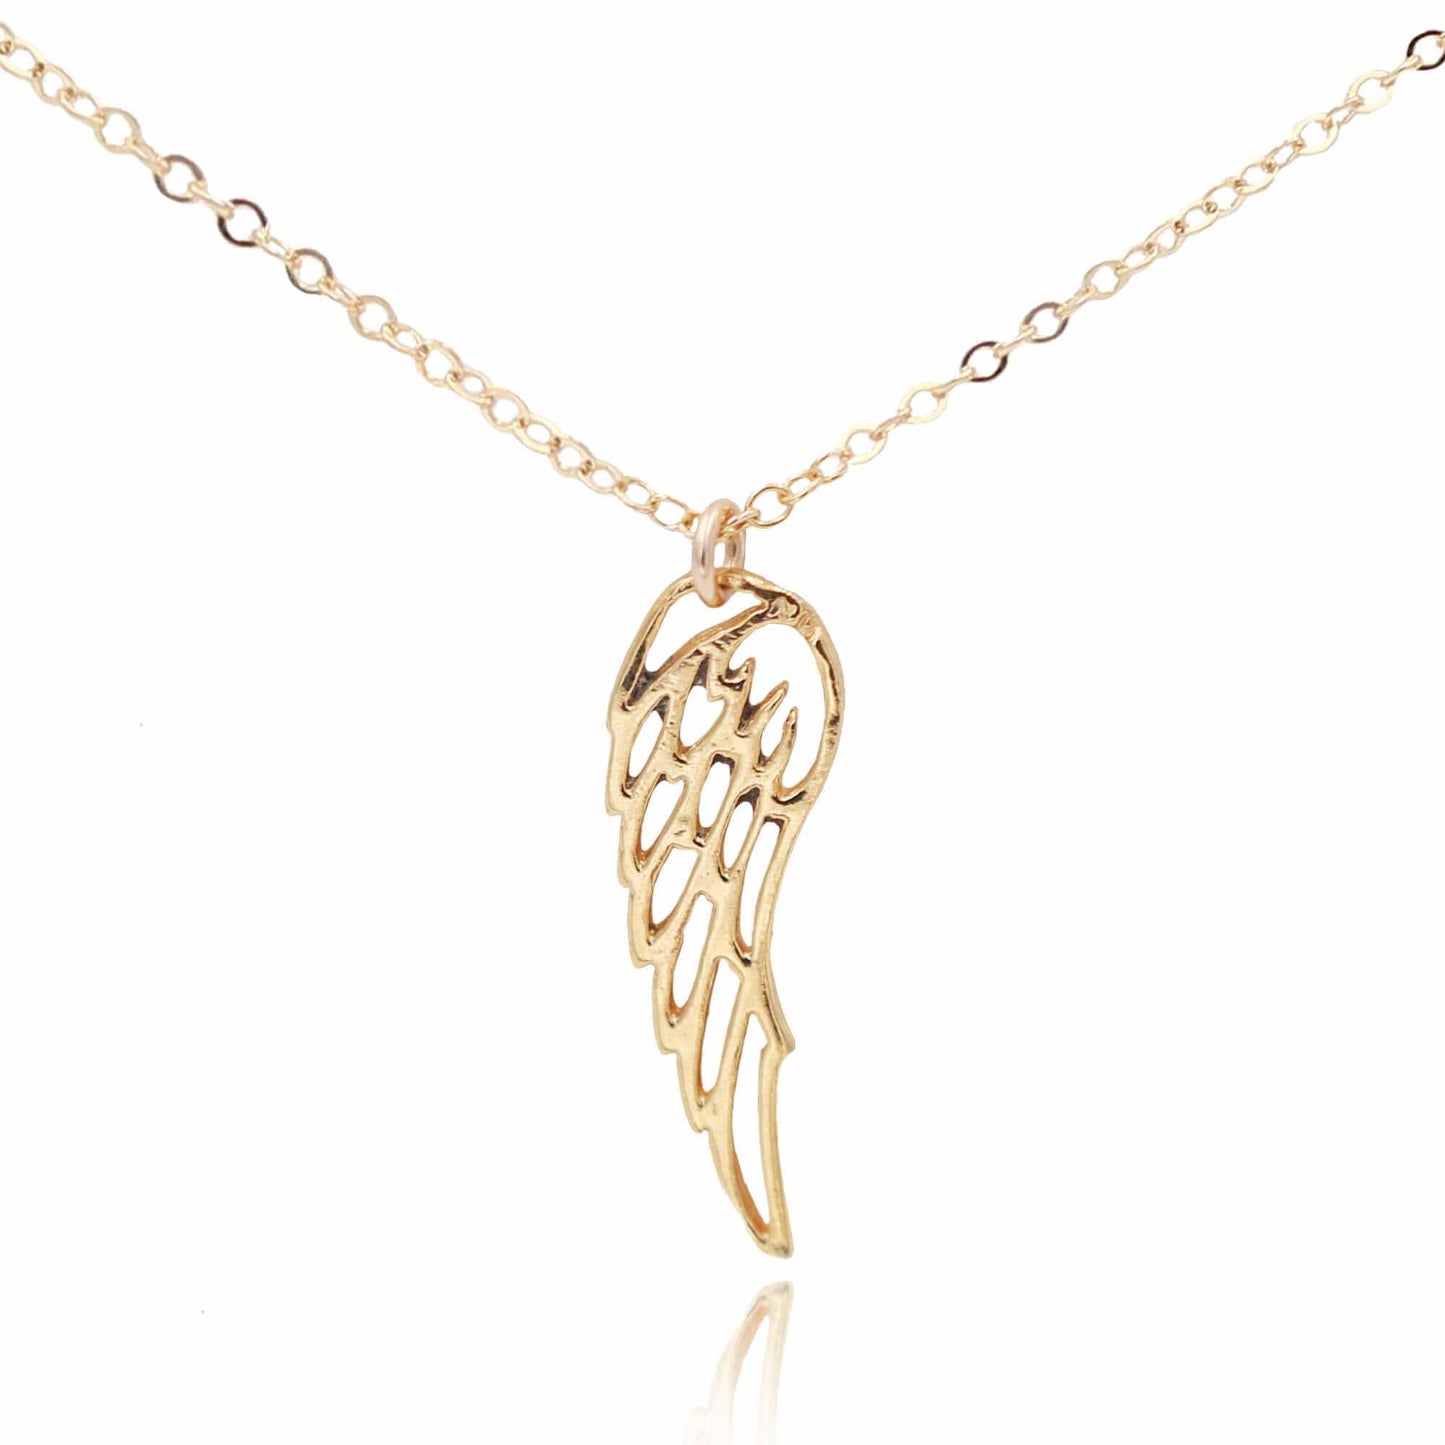 Sister Angel Wing Necklace Dainty Necklace 14k Gold Filled MaeMae Jewelry | Angel Wing Charm | Sister Necklace